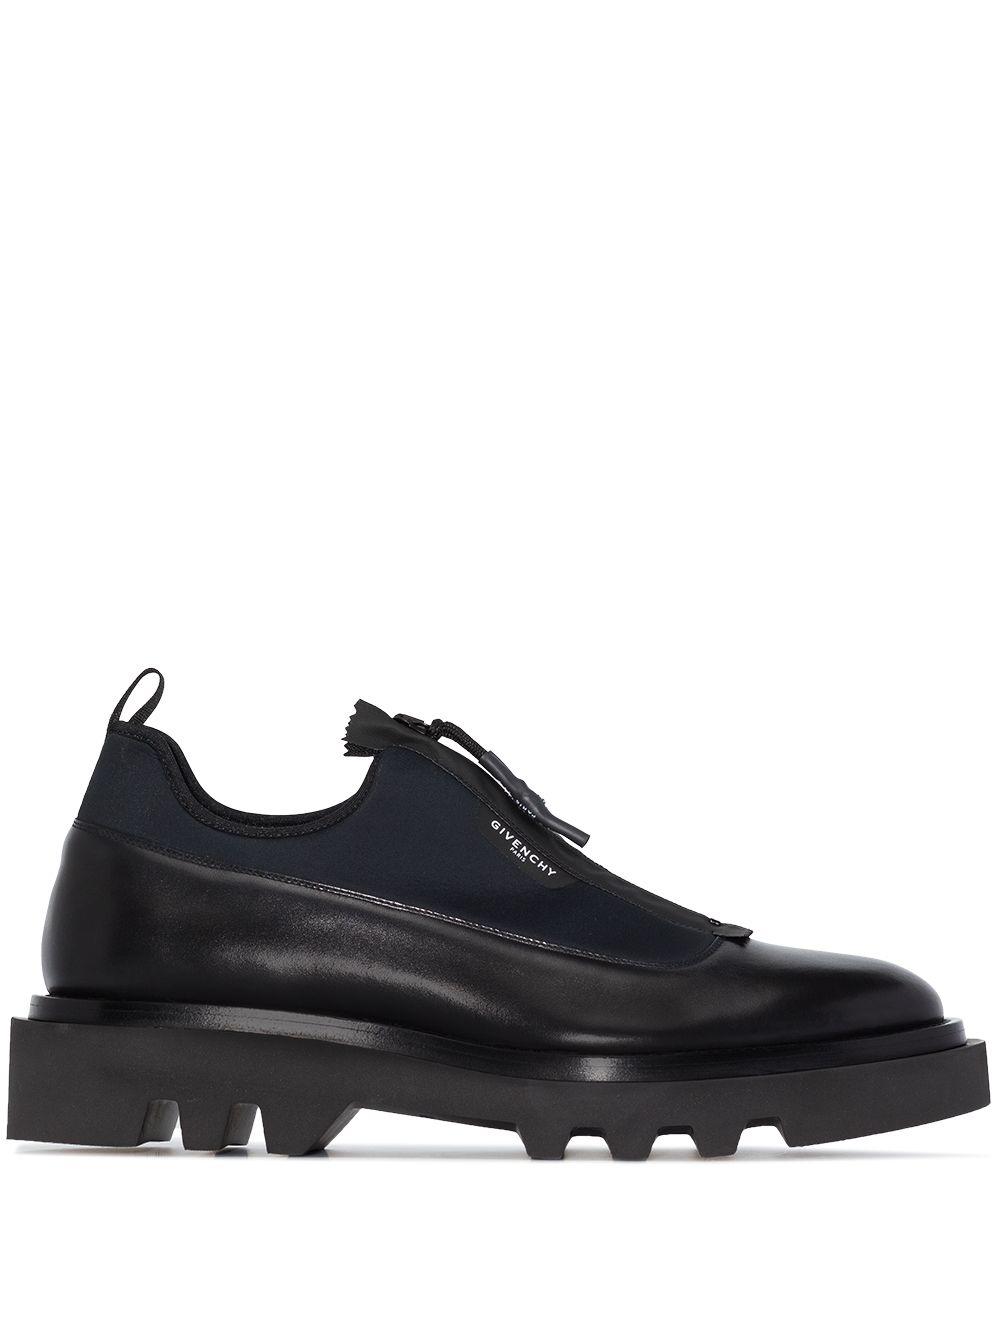 Givenchy Combat Derby Shoes for Men - Lyst